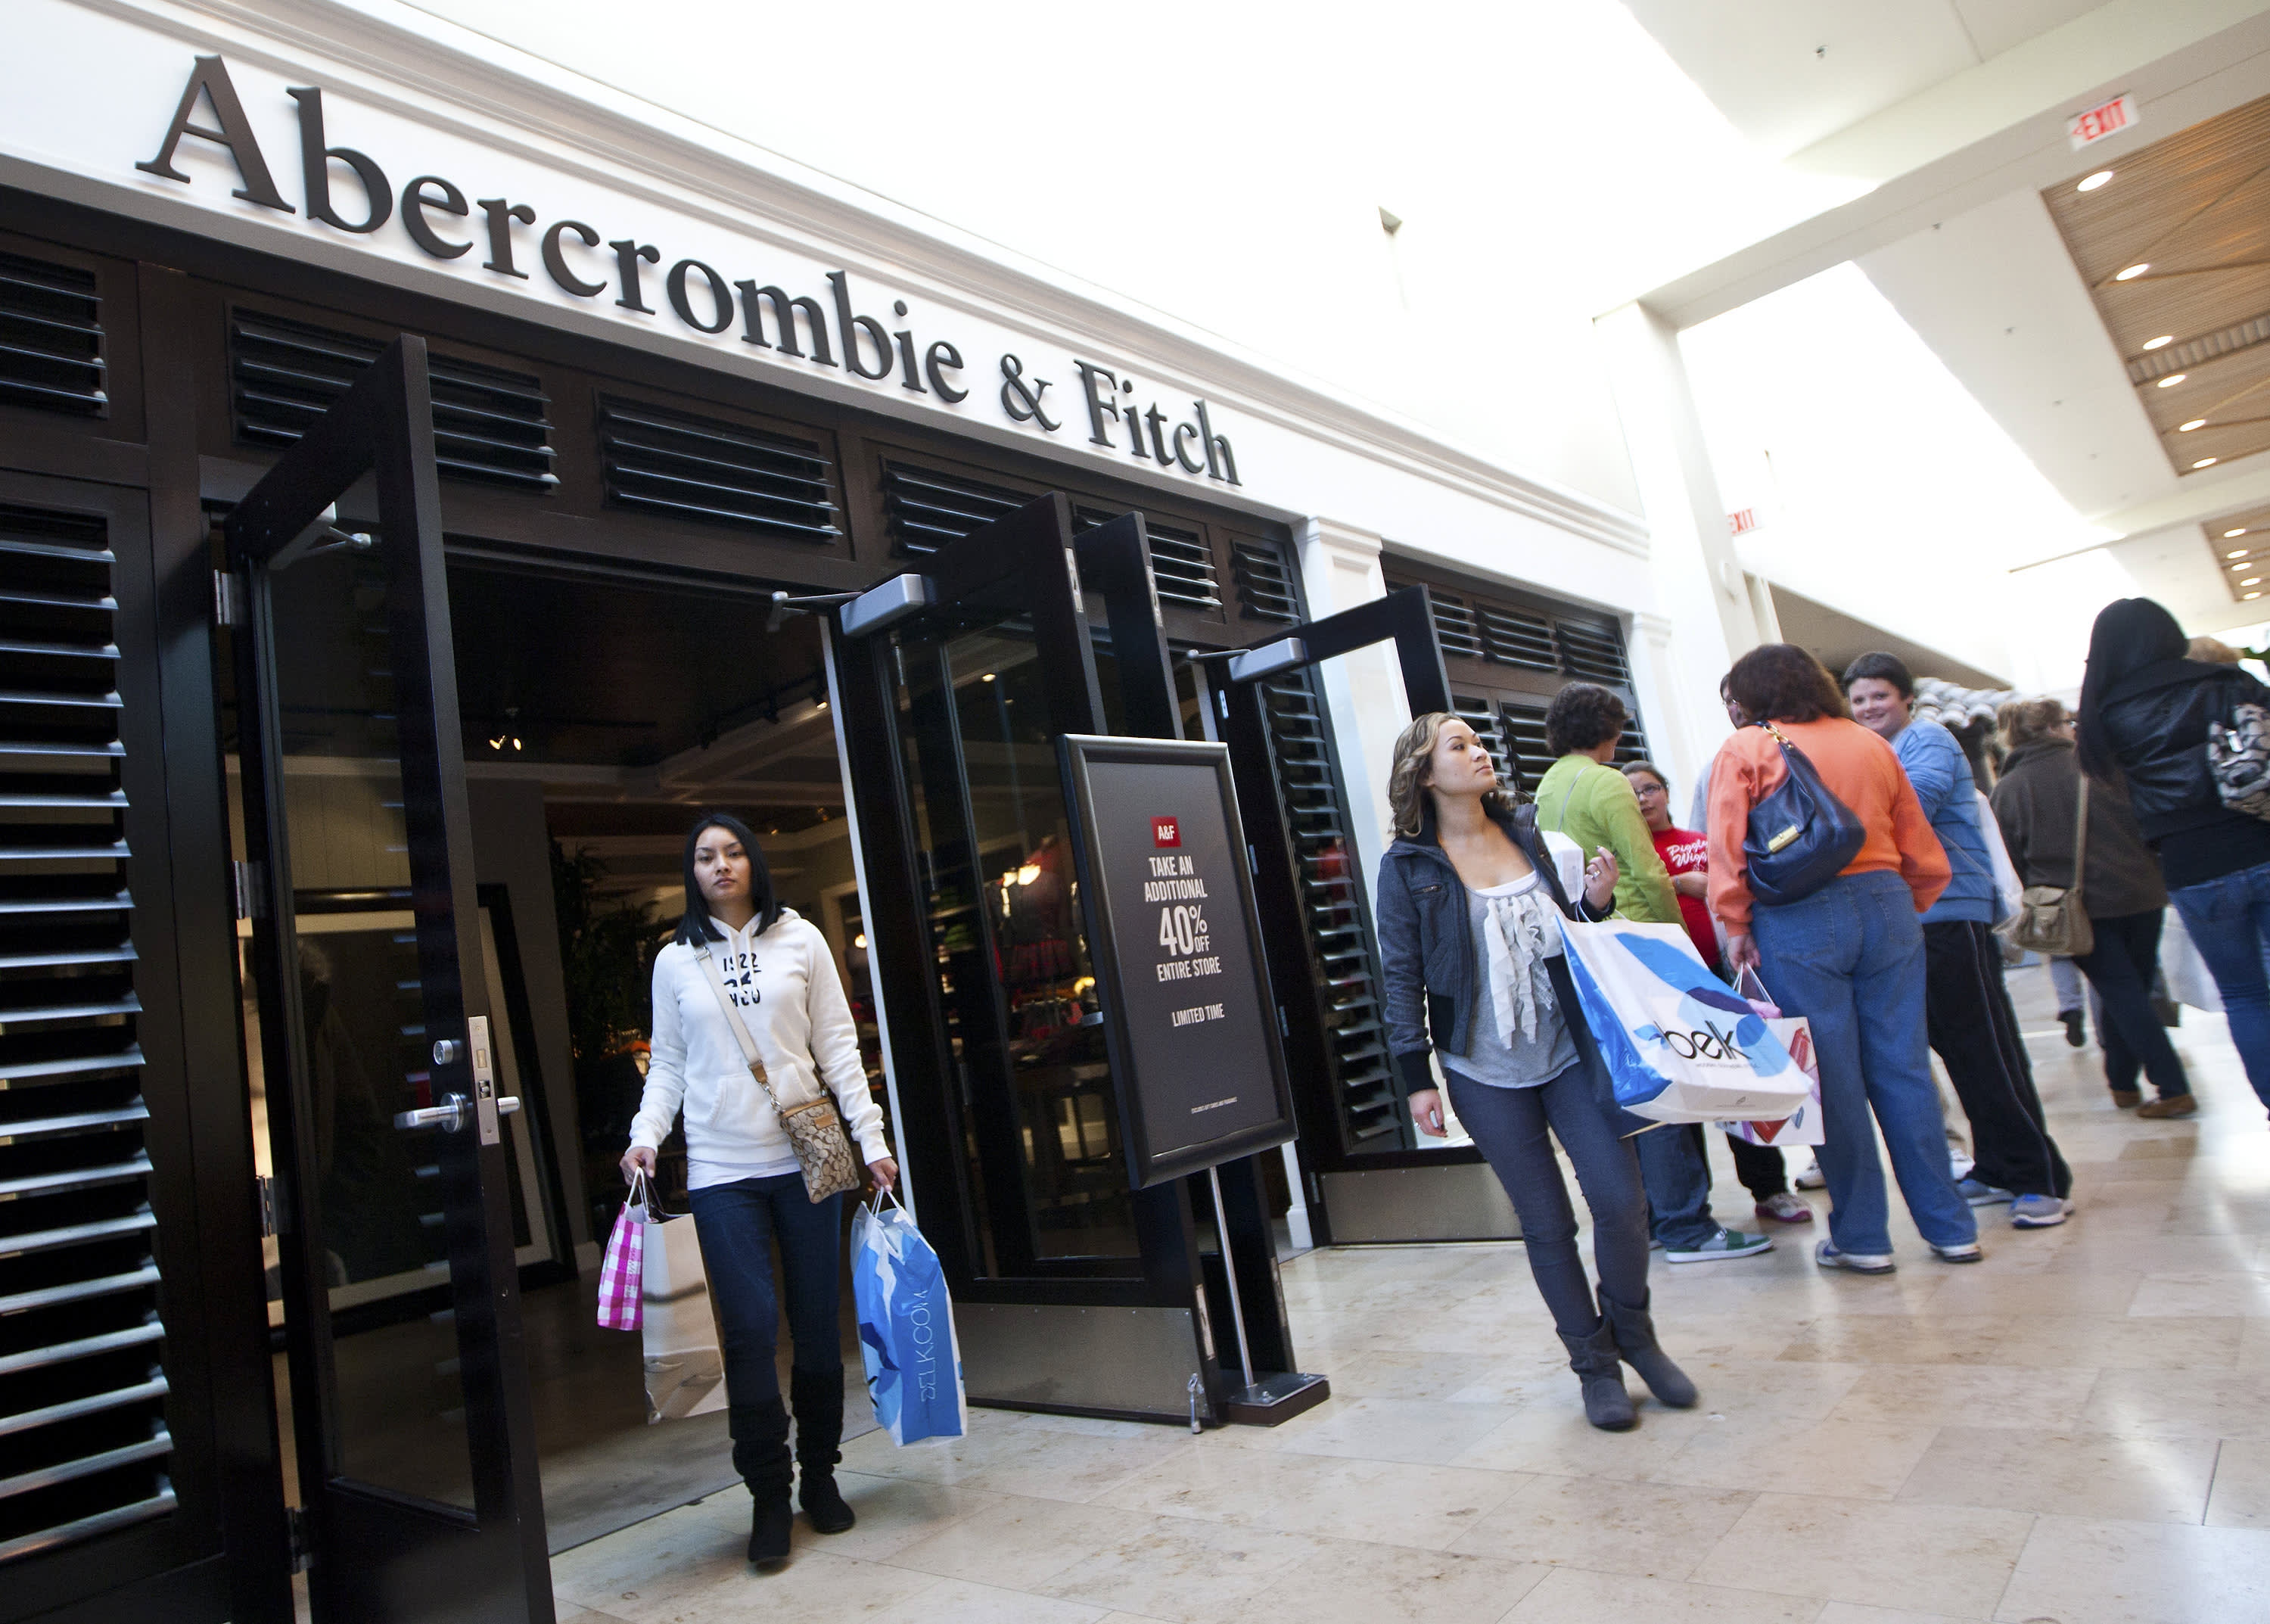 abercrombie and fitch near me